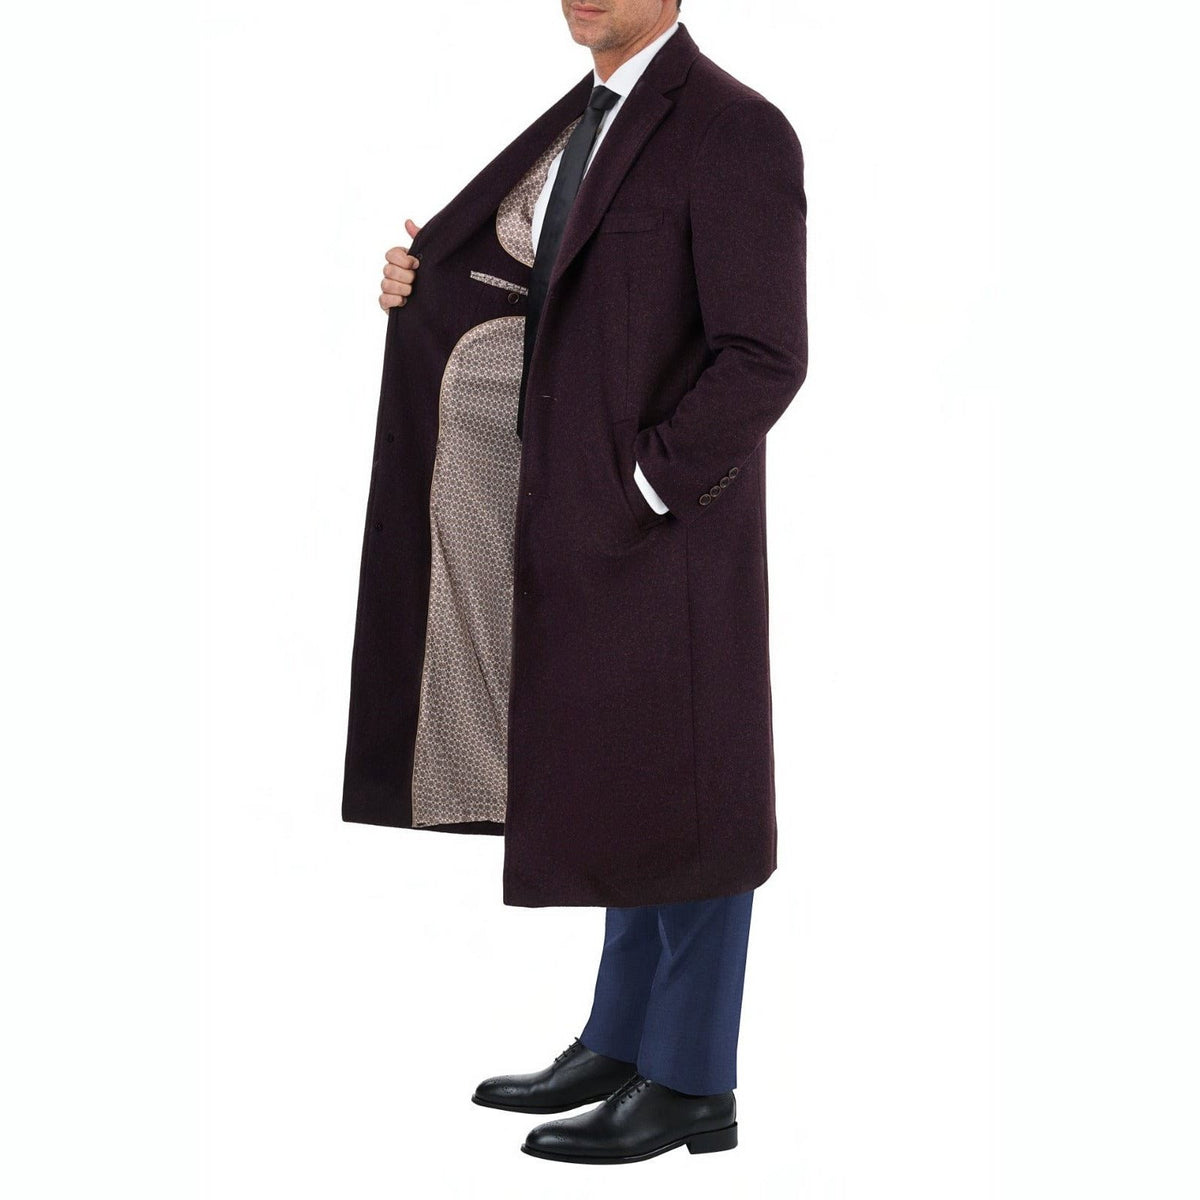 Label E OUTERWEAR Mens Regular Fit Solid Burgundy Full Length Wool Cashmere Overcoat Top Coat